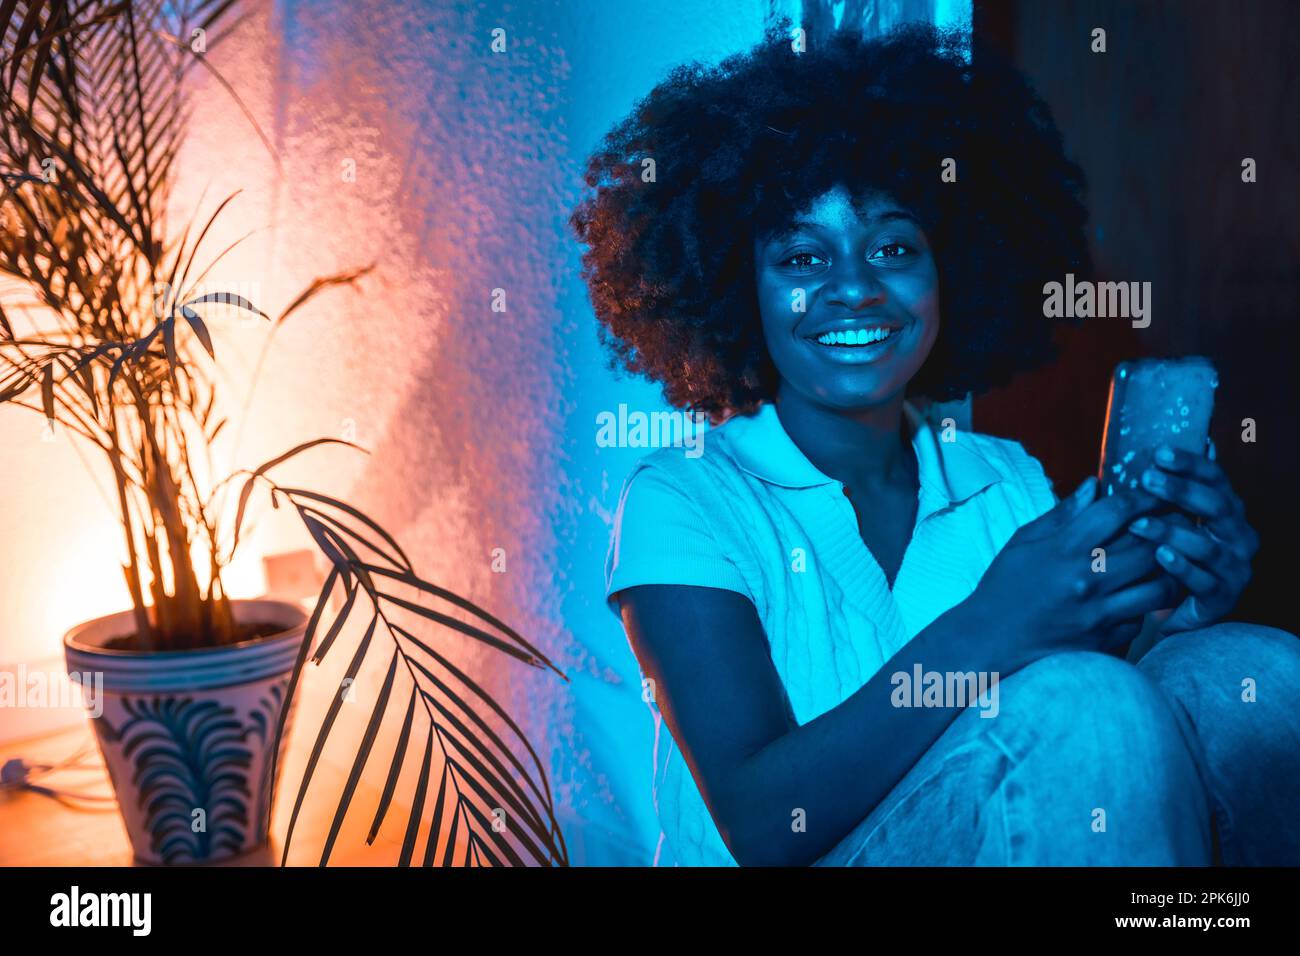 African american woman with afro hair sitting at home on the floor looking at the phone at night with a blue light Stock Photo